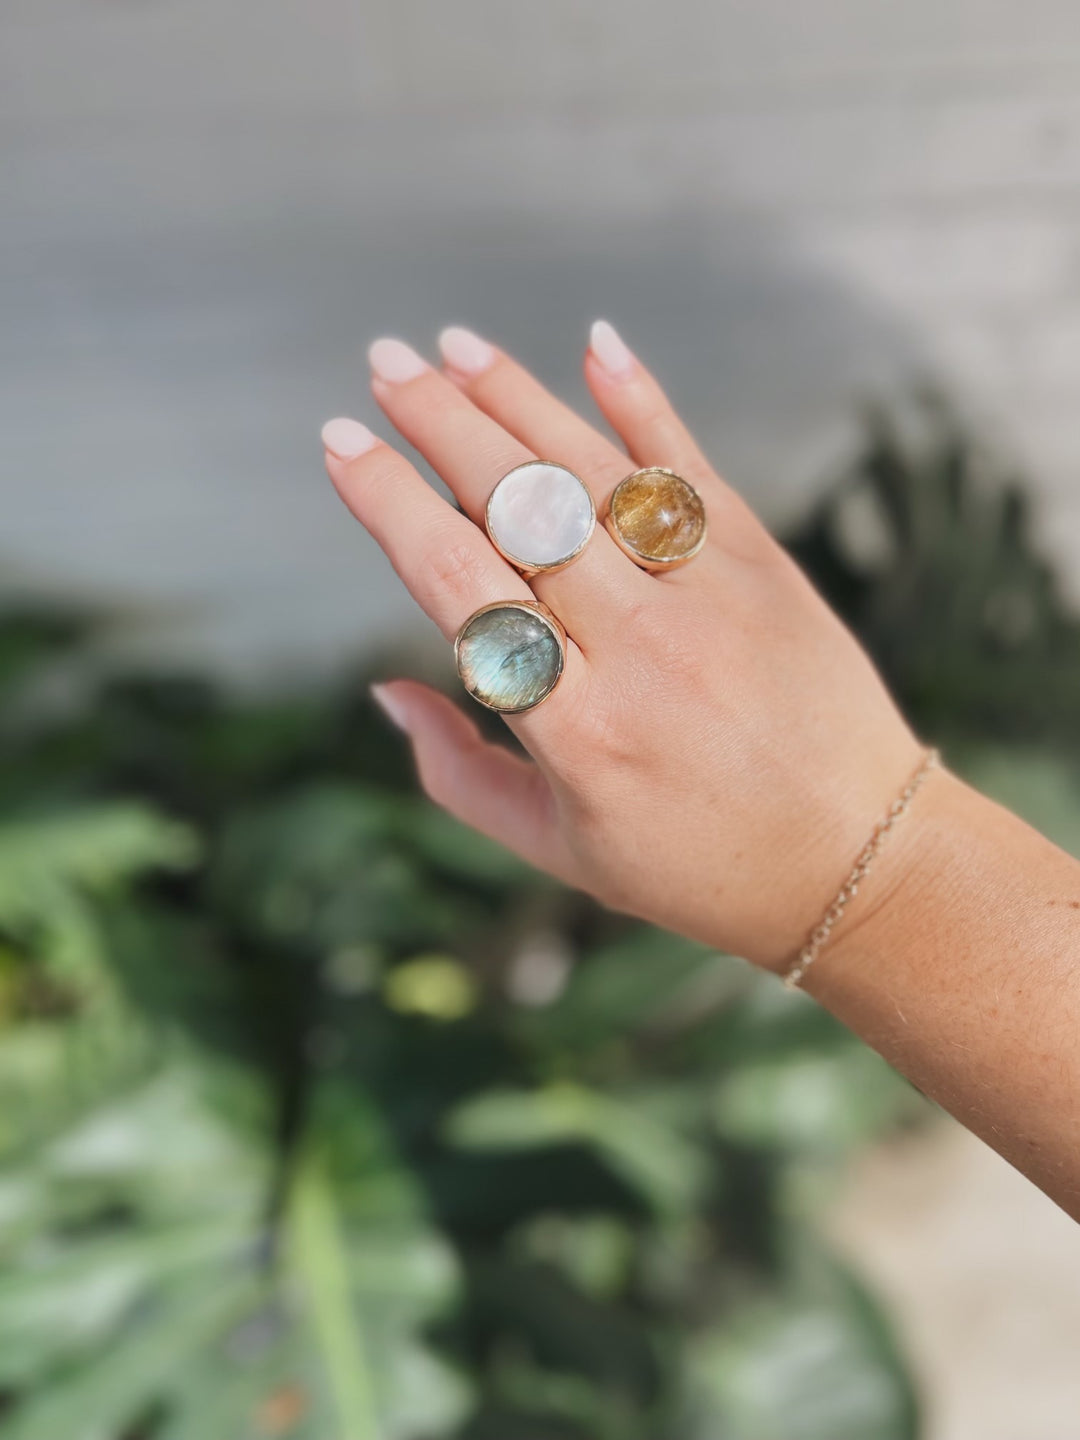 MIMOSA Handcrafted Mother Tree Rings with (from left to right) Labradorite, Mother of Pearl, and Rutilated Quartz Stones